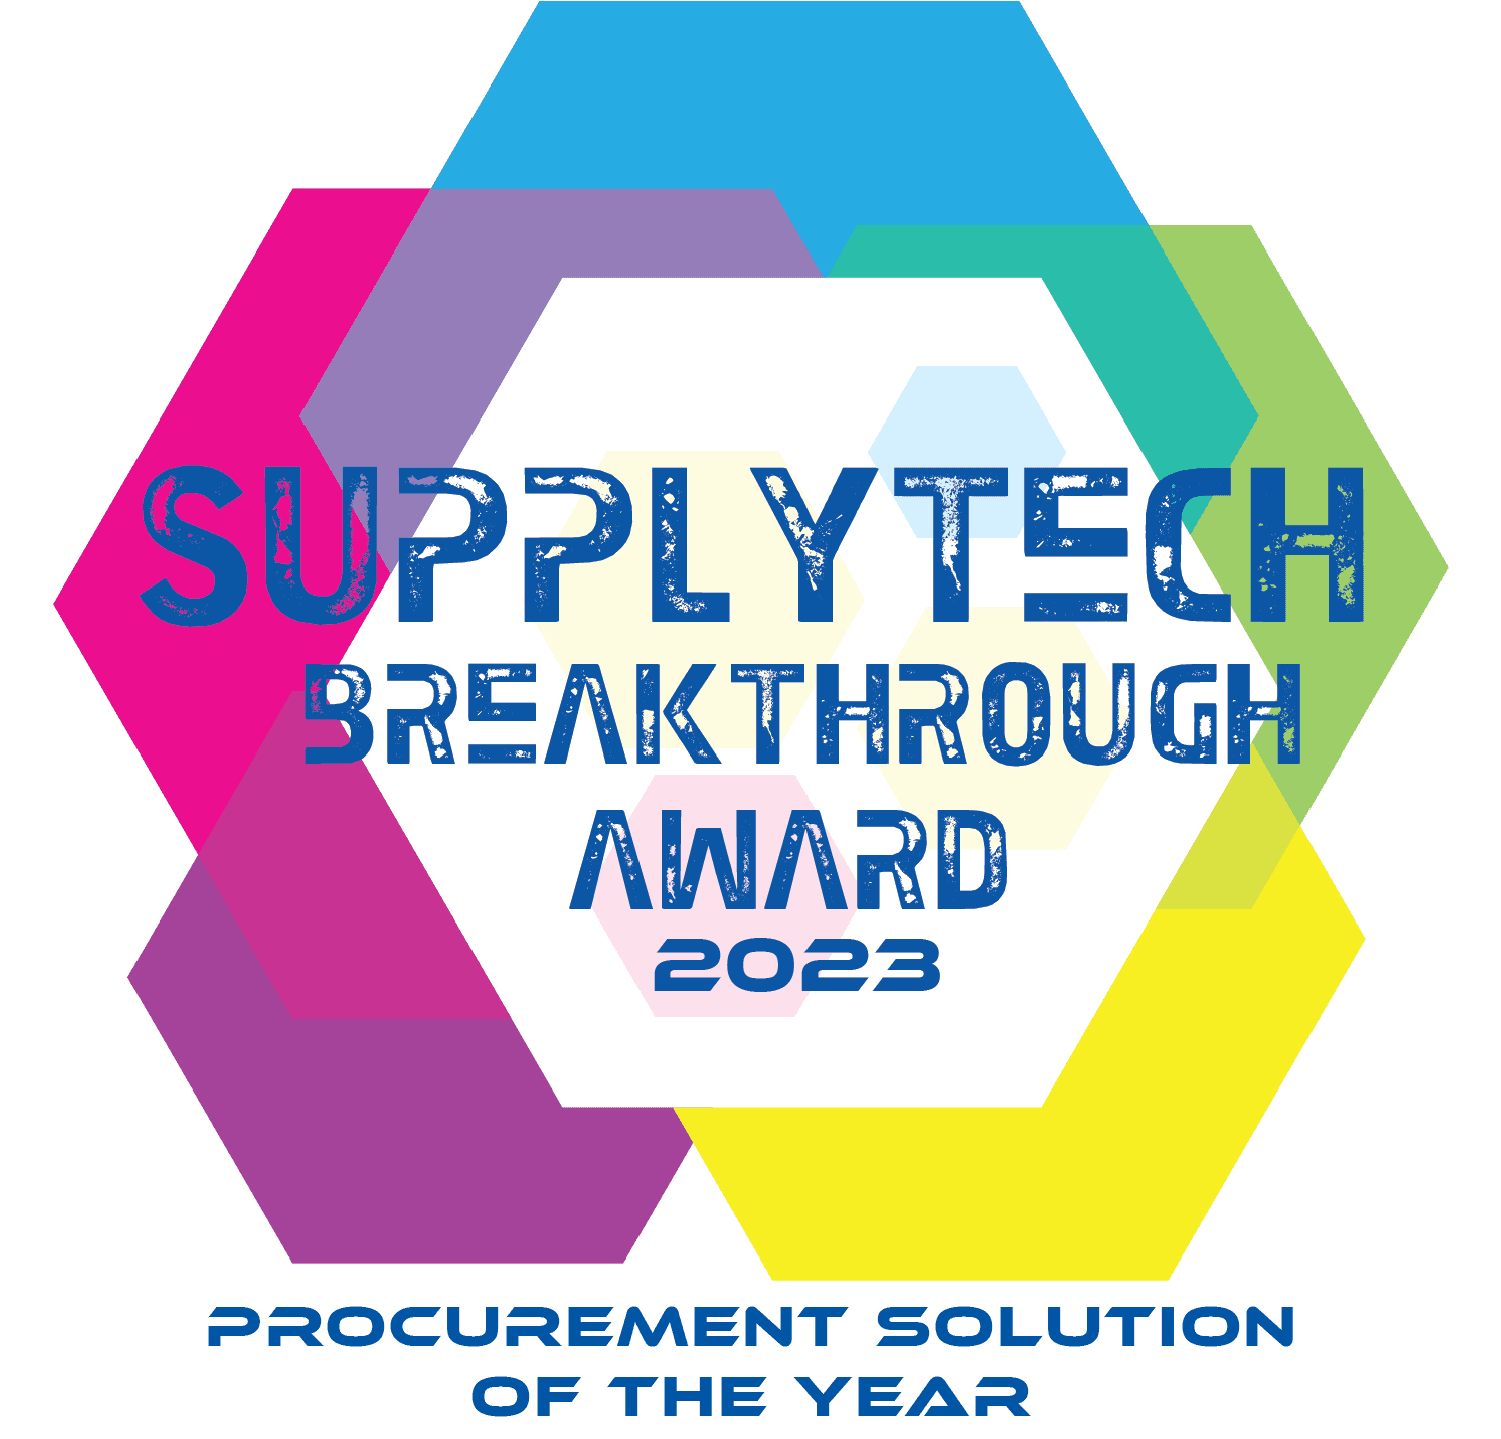 Product Sleek Technologies Named “Procurement Solution Of The Year” From SupplyTech Breakthrough For Second Year In A Row - sleek-technologies.com image